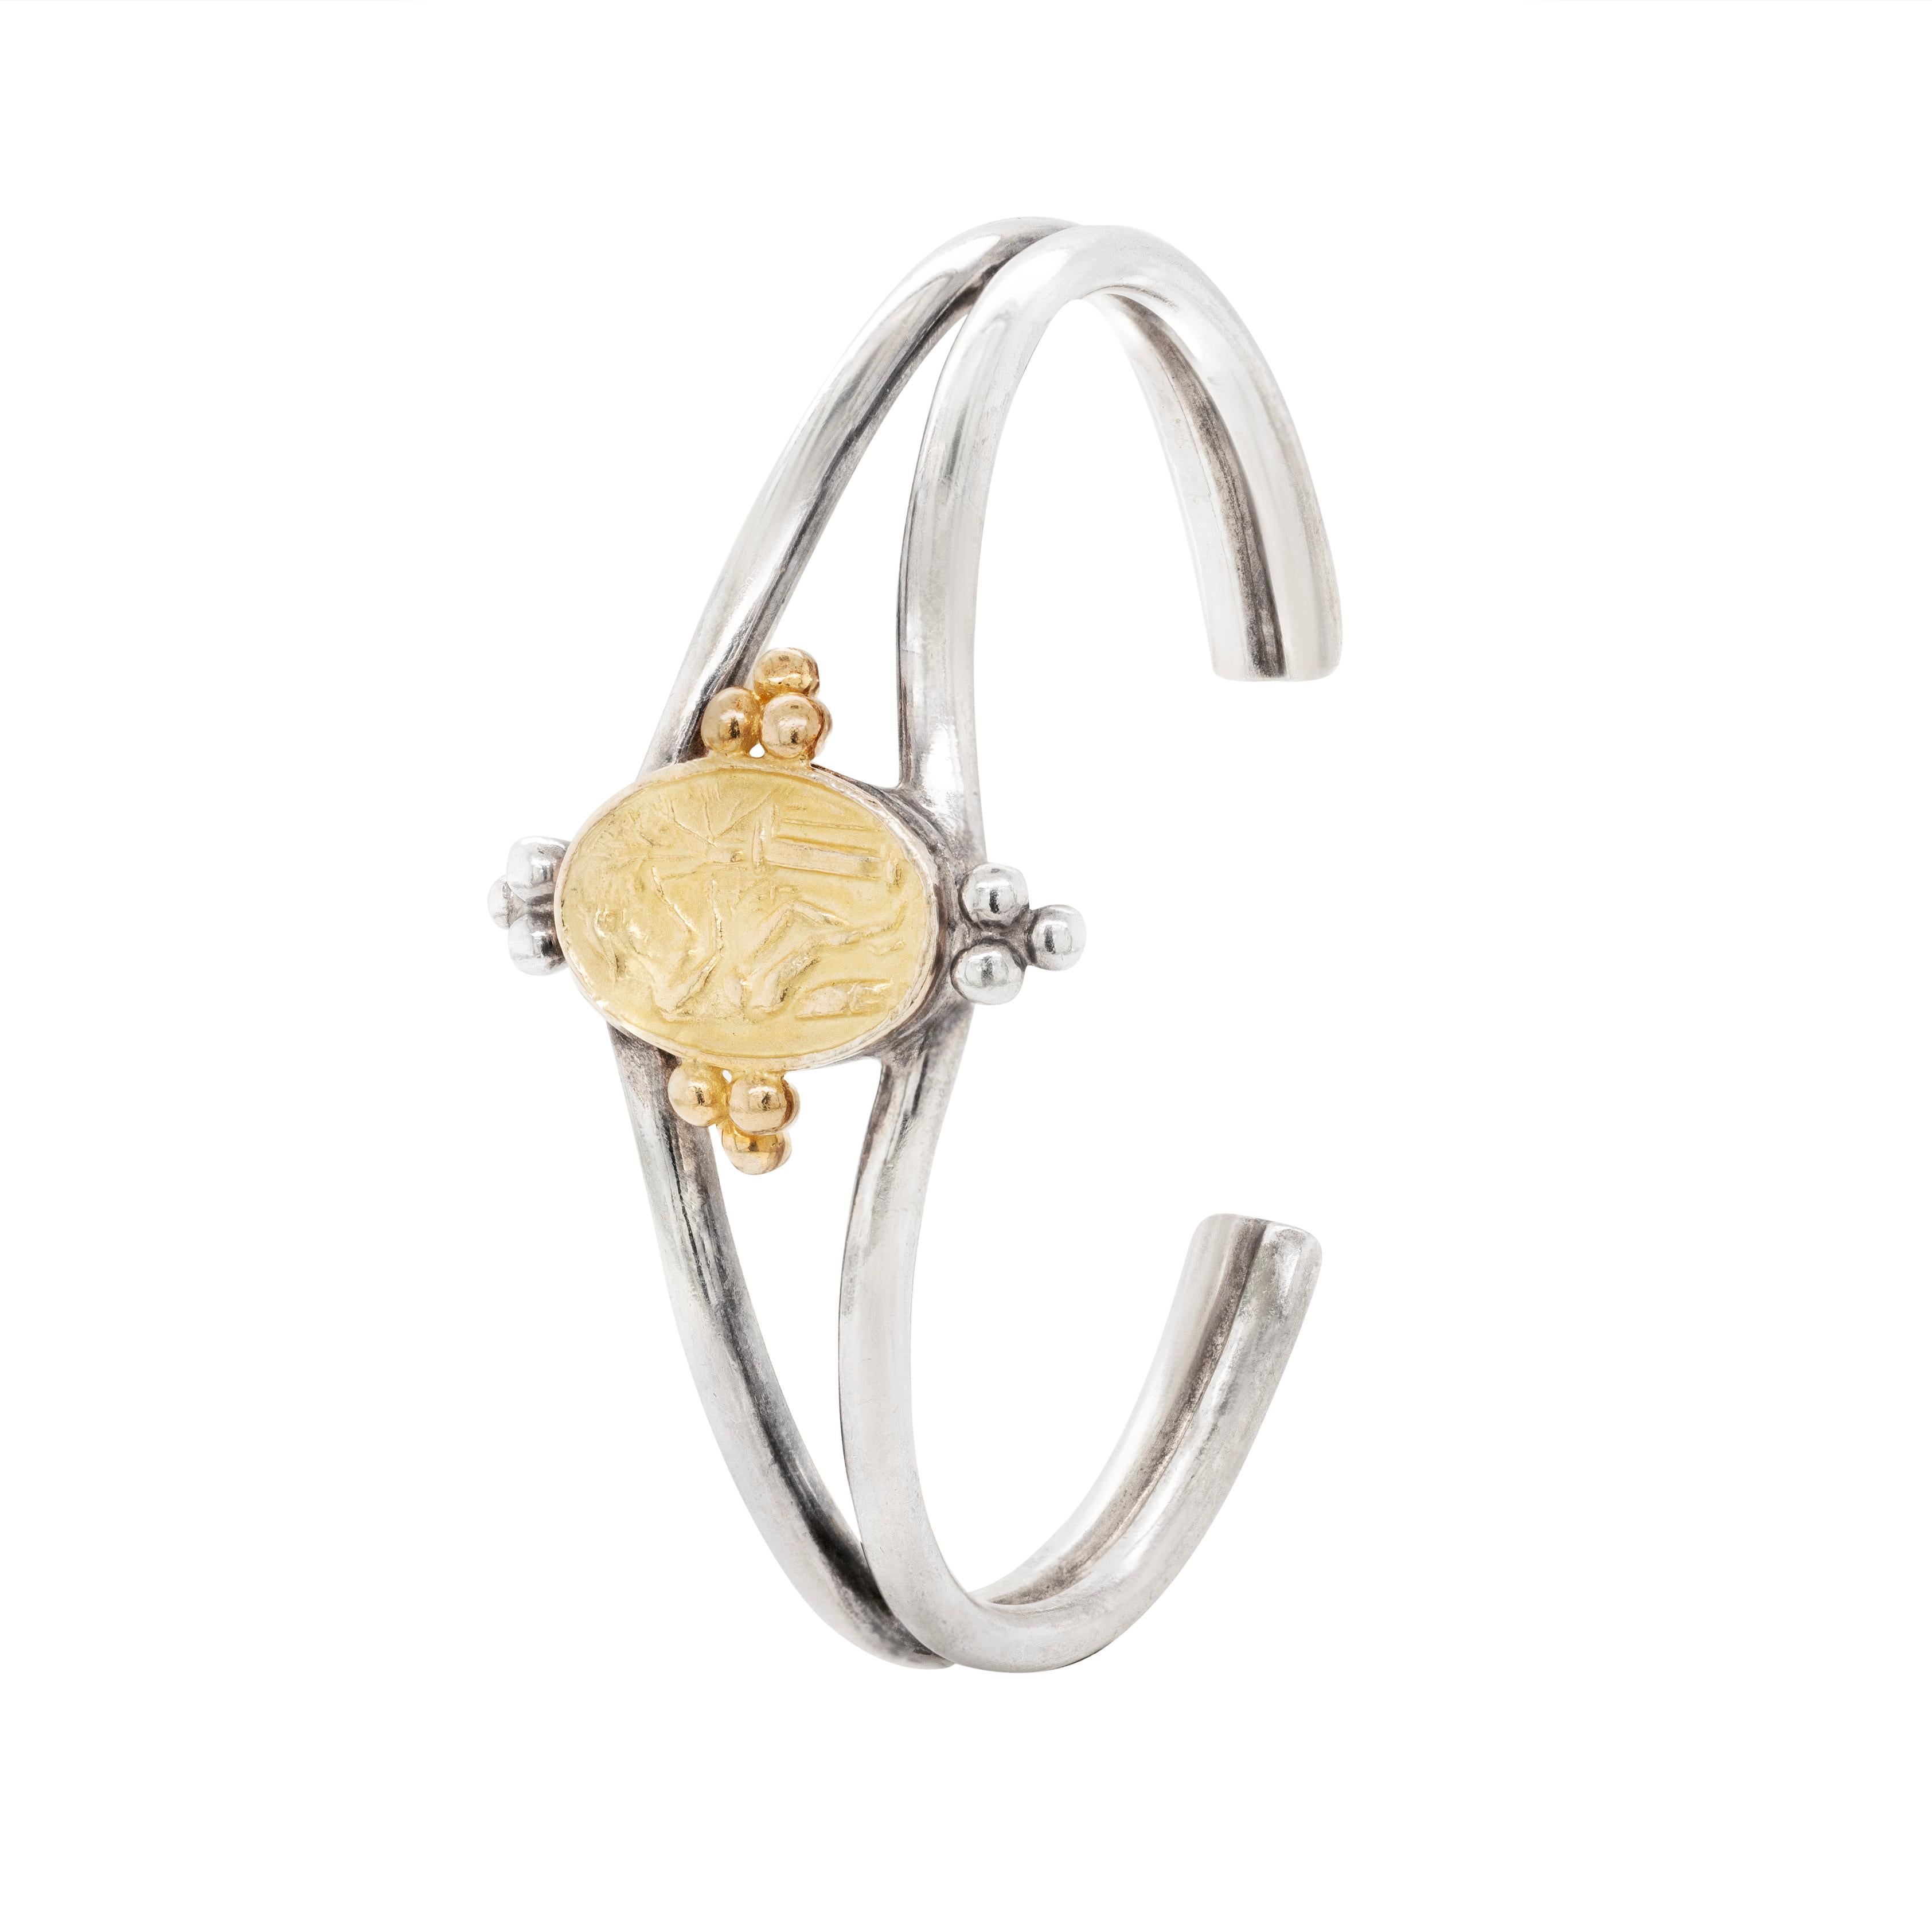 This wonderful piece by famous designer Helen Woodhull is beautifully designed as a split cuff with soldered ends masterfully crafted from sterling silver and 22 carat yellow gold. The centerpiece is a 22 carat yellow gold oval shaped intaglio